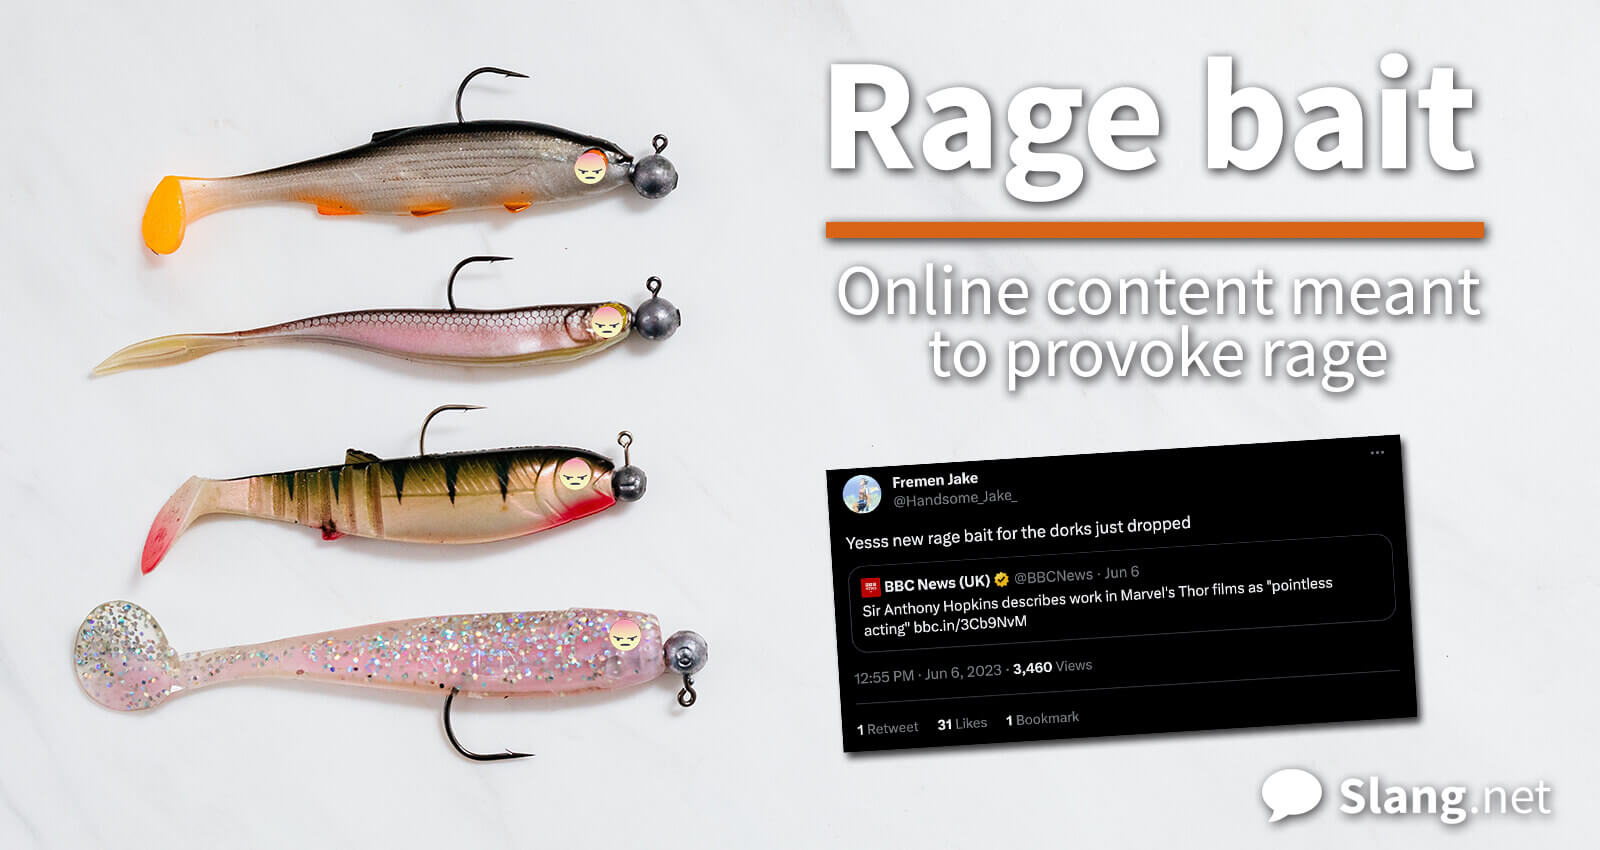 Be wary of rage bait online